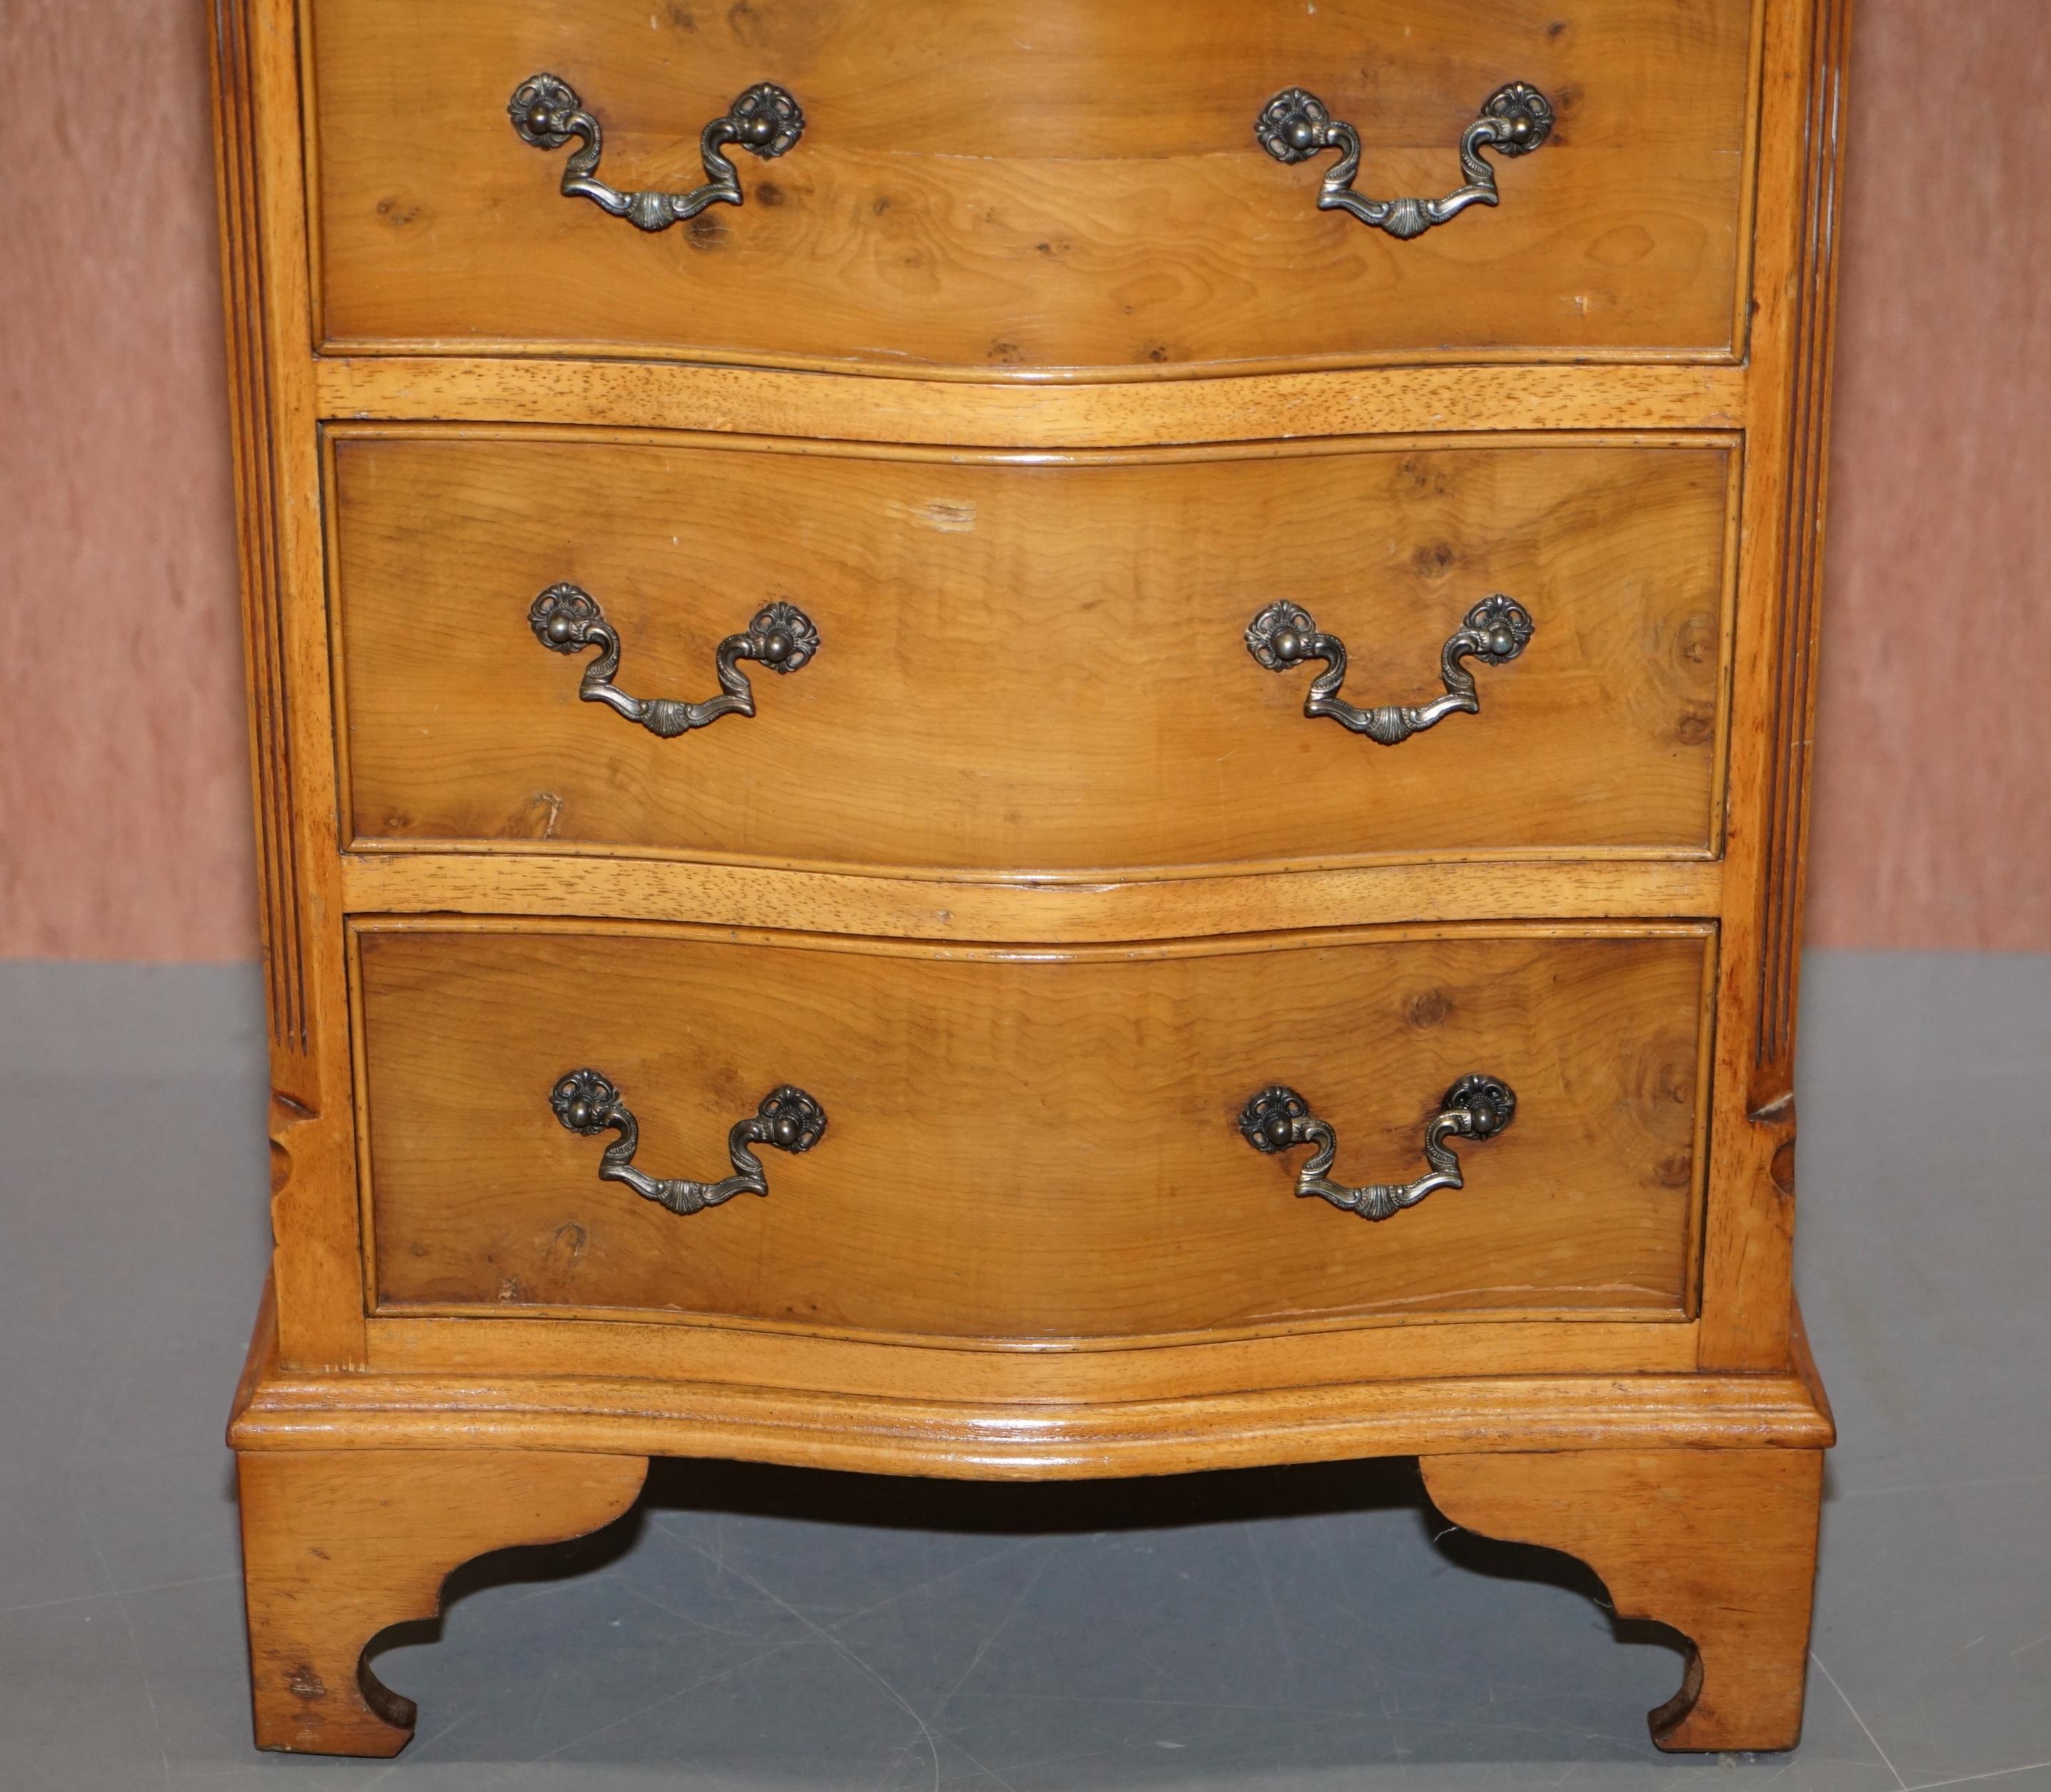 Hand-Crafted Stunning Burr Walnut Chest of Drawers or Lovely Lamp End Wine Bedside Table